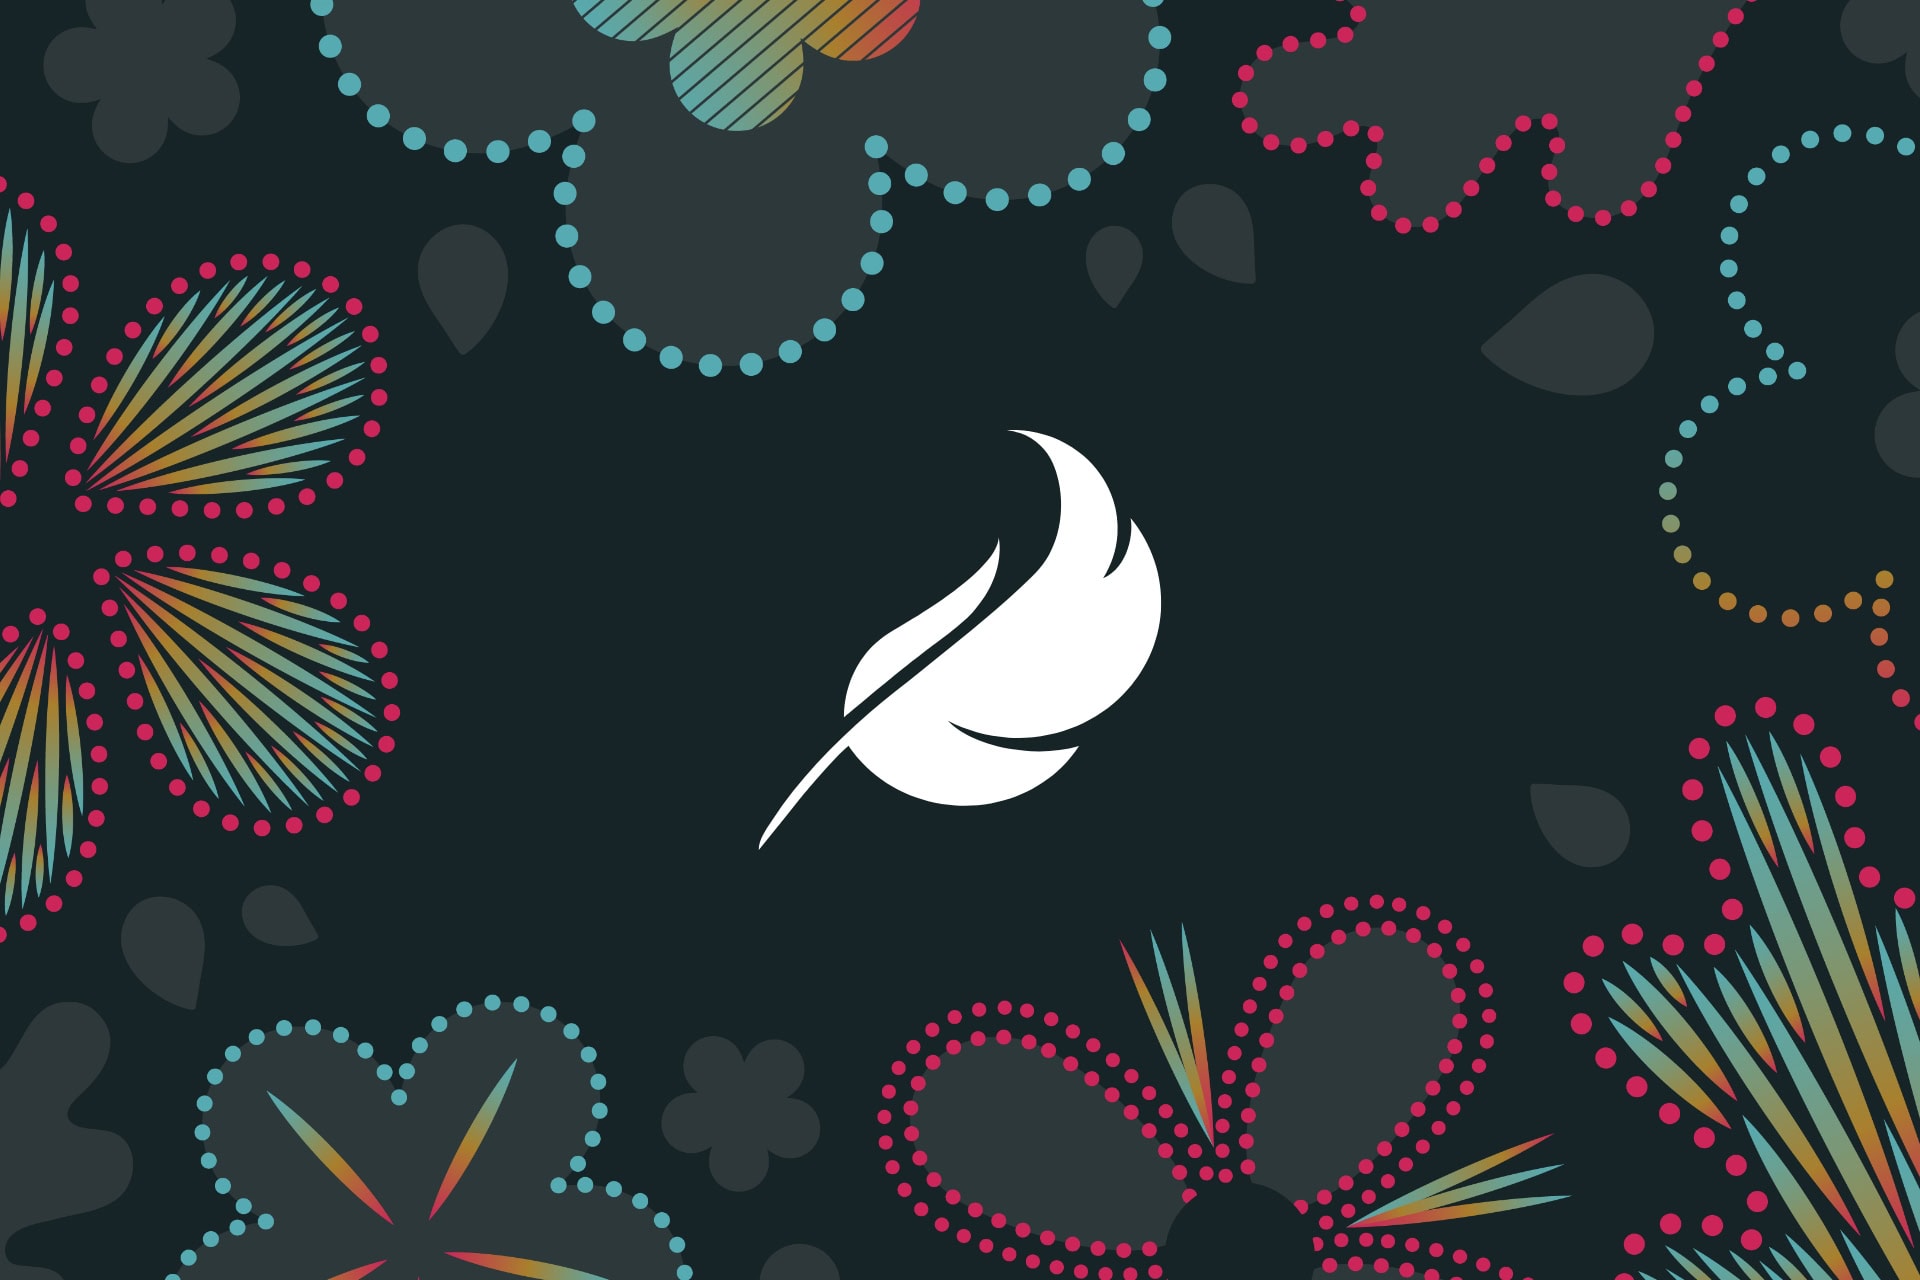 A white feather appears prominently in the foreground, surrounded by the DDP rebranded designs